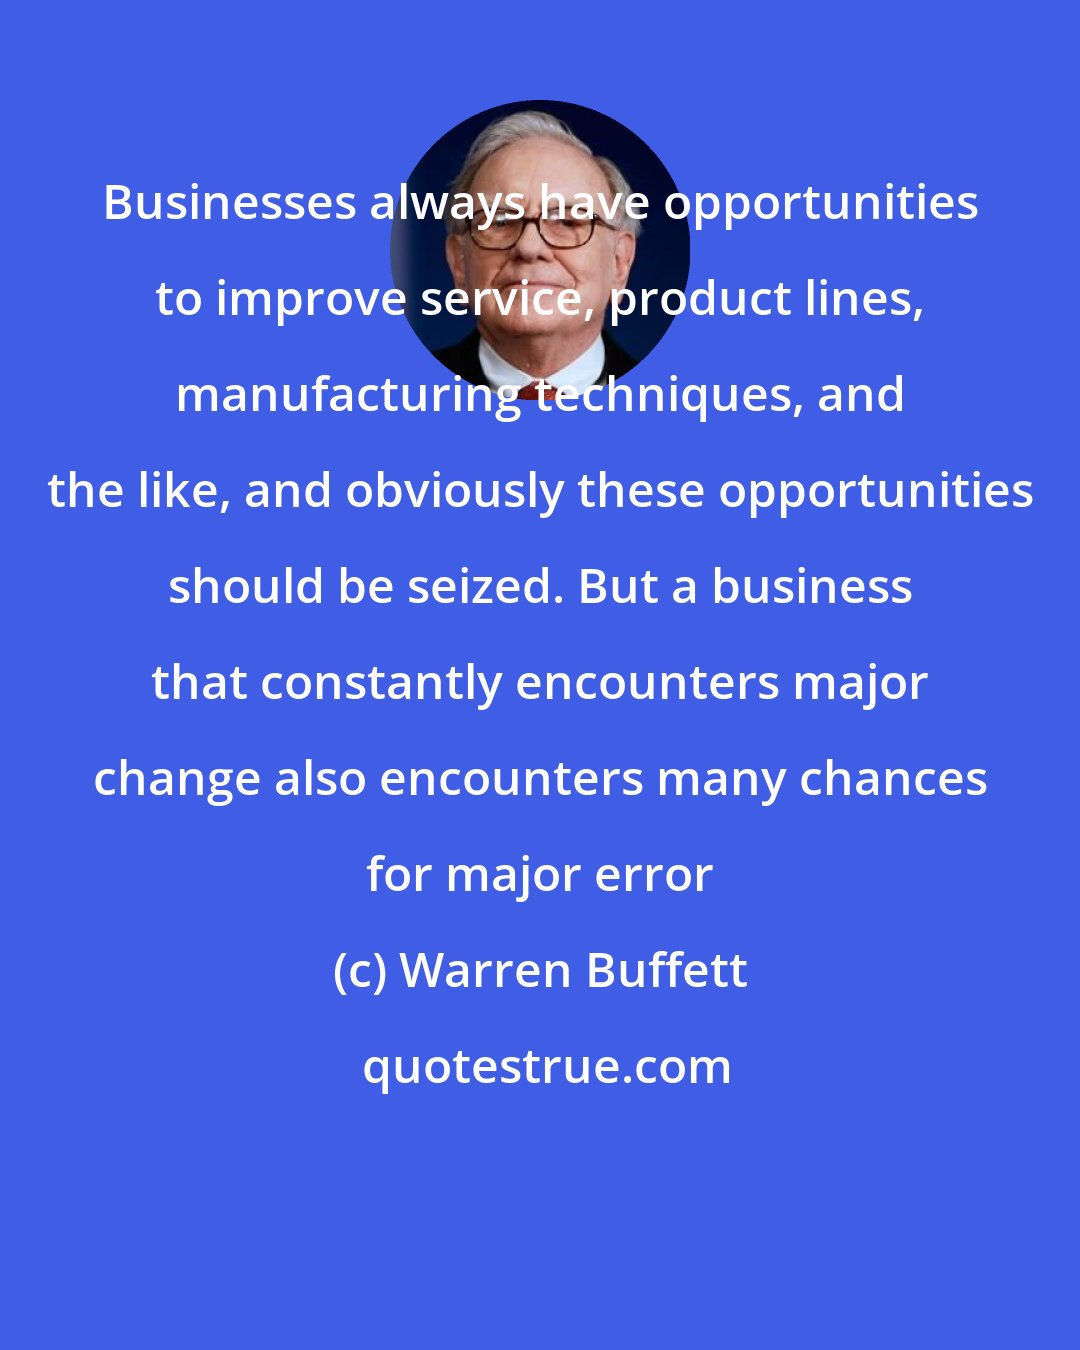 Warren Buffett: Businesses always have opportunities to improve service, product lines, manufacturing techniques, and the like, and obviously these opportunities should be seized. But a business that constantly encounters major change also encounters many chances for major error